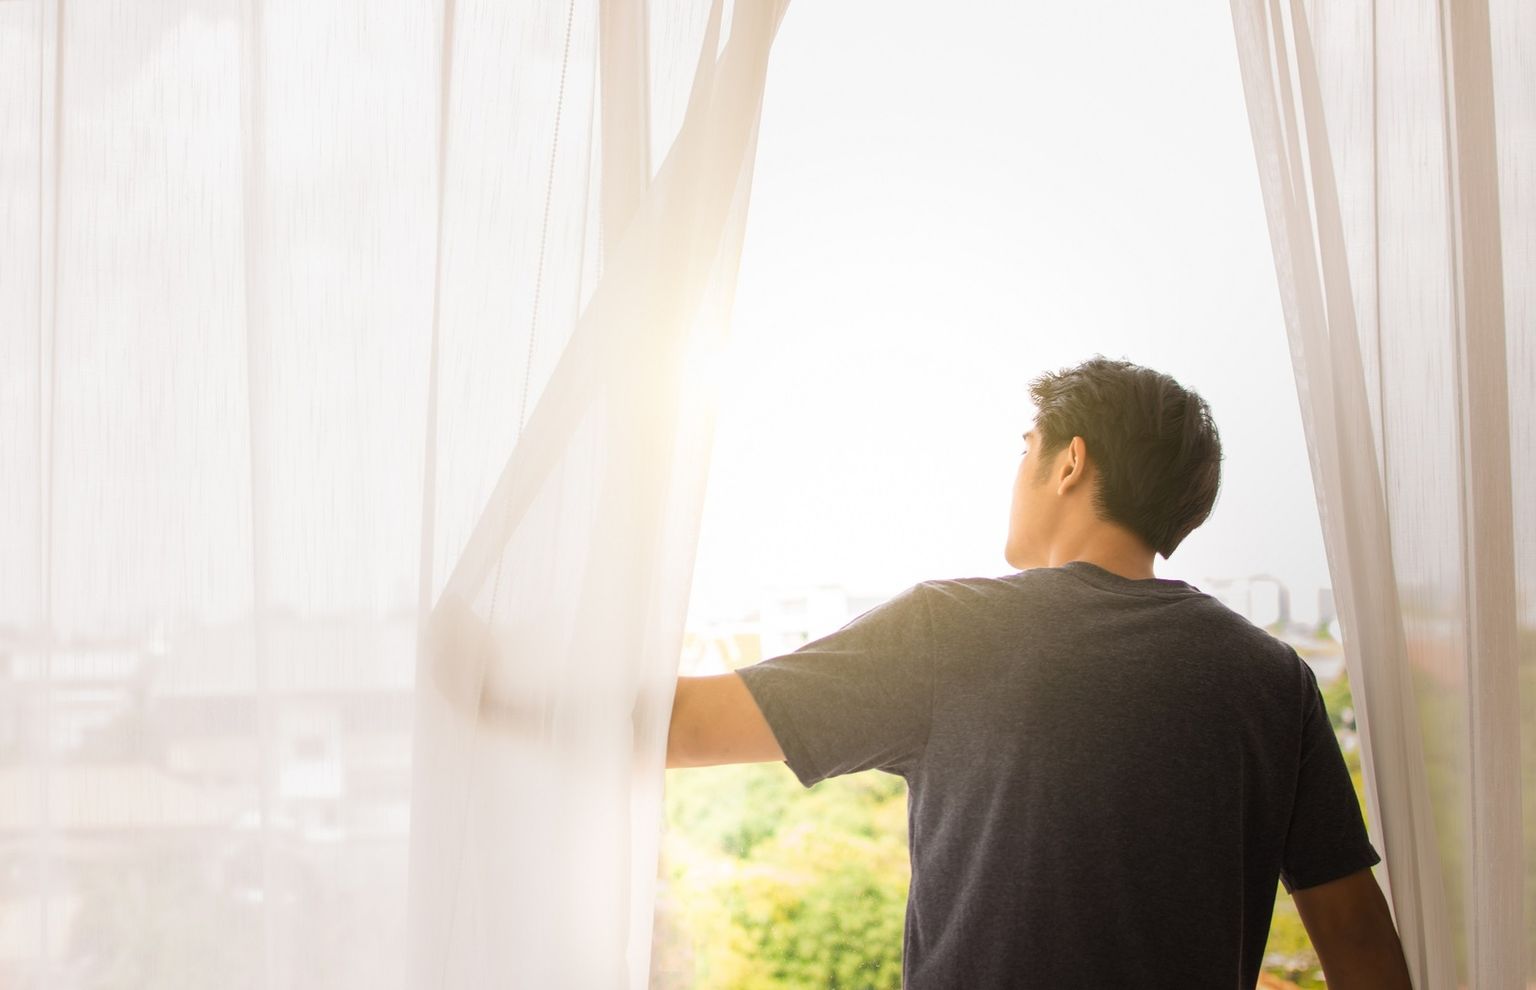 One person pushes aside a light window curtain to allow the sun to shine through.